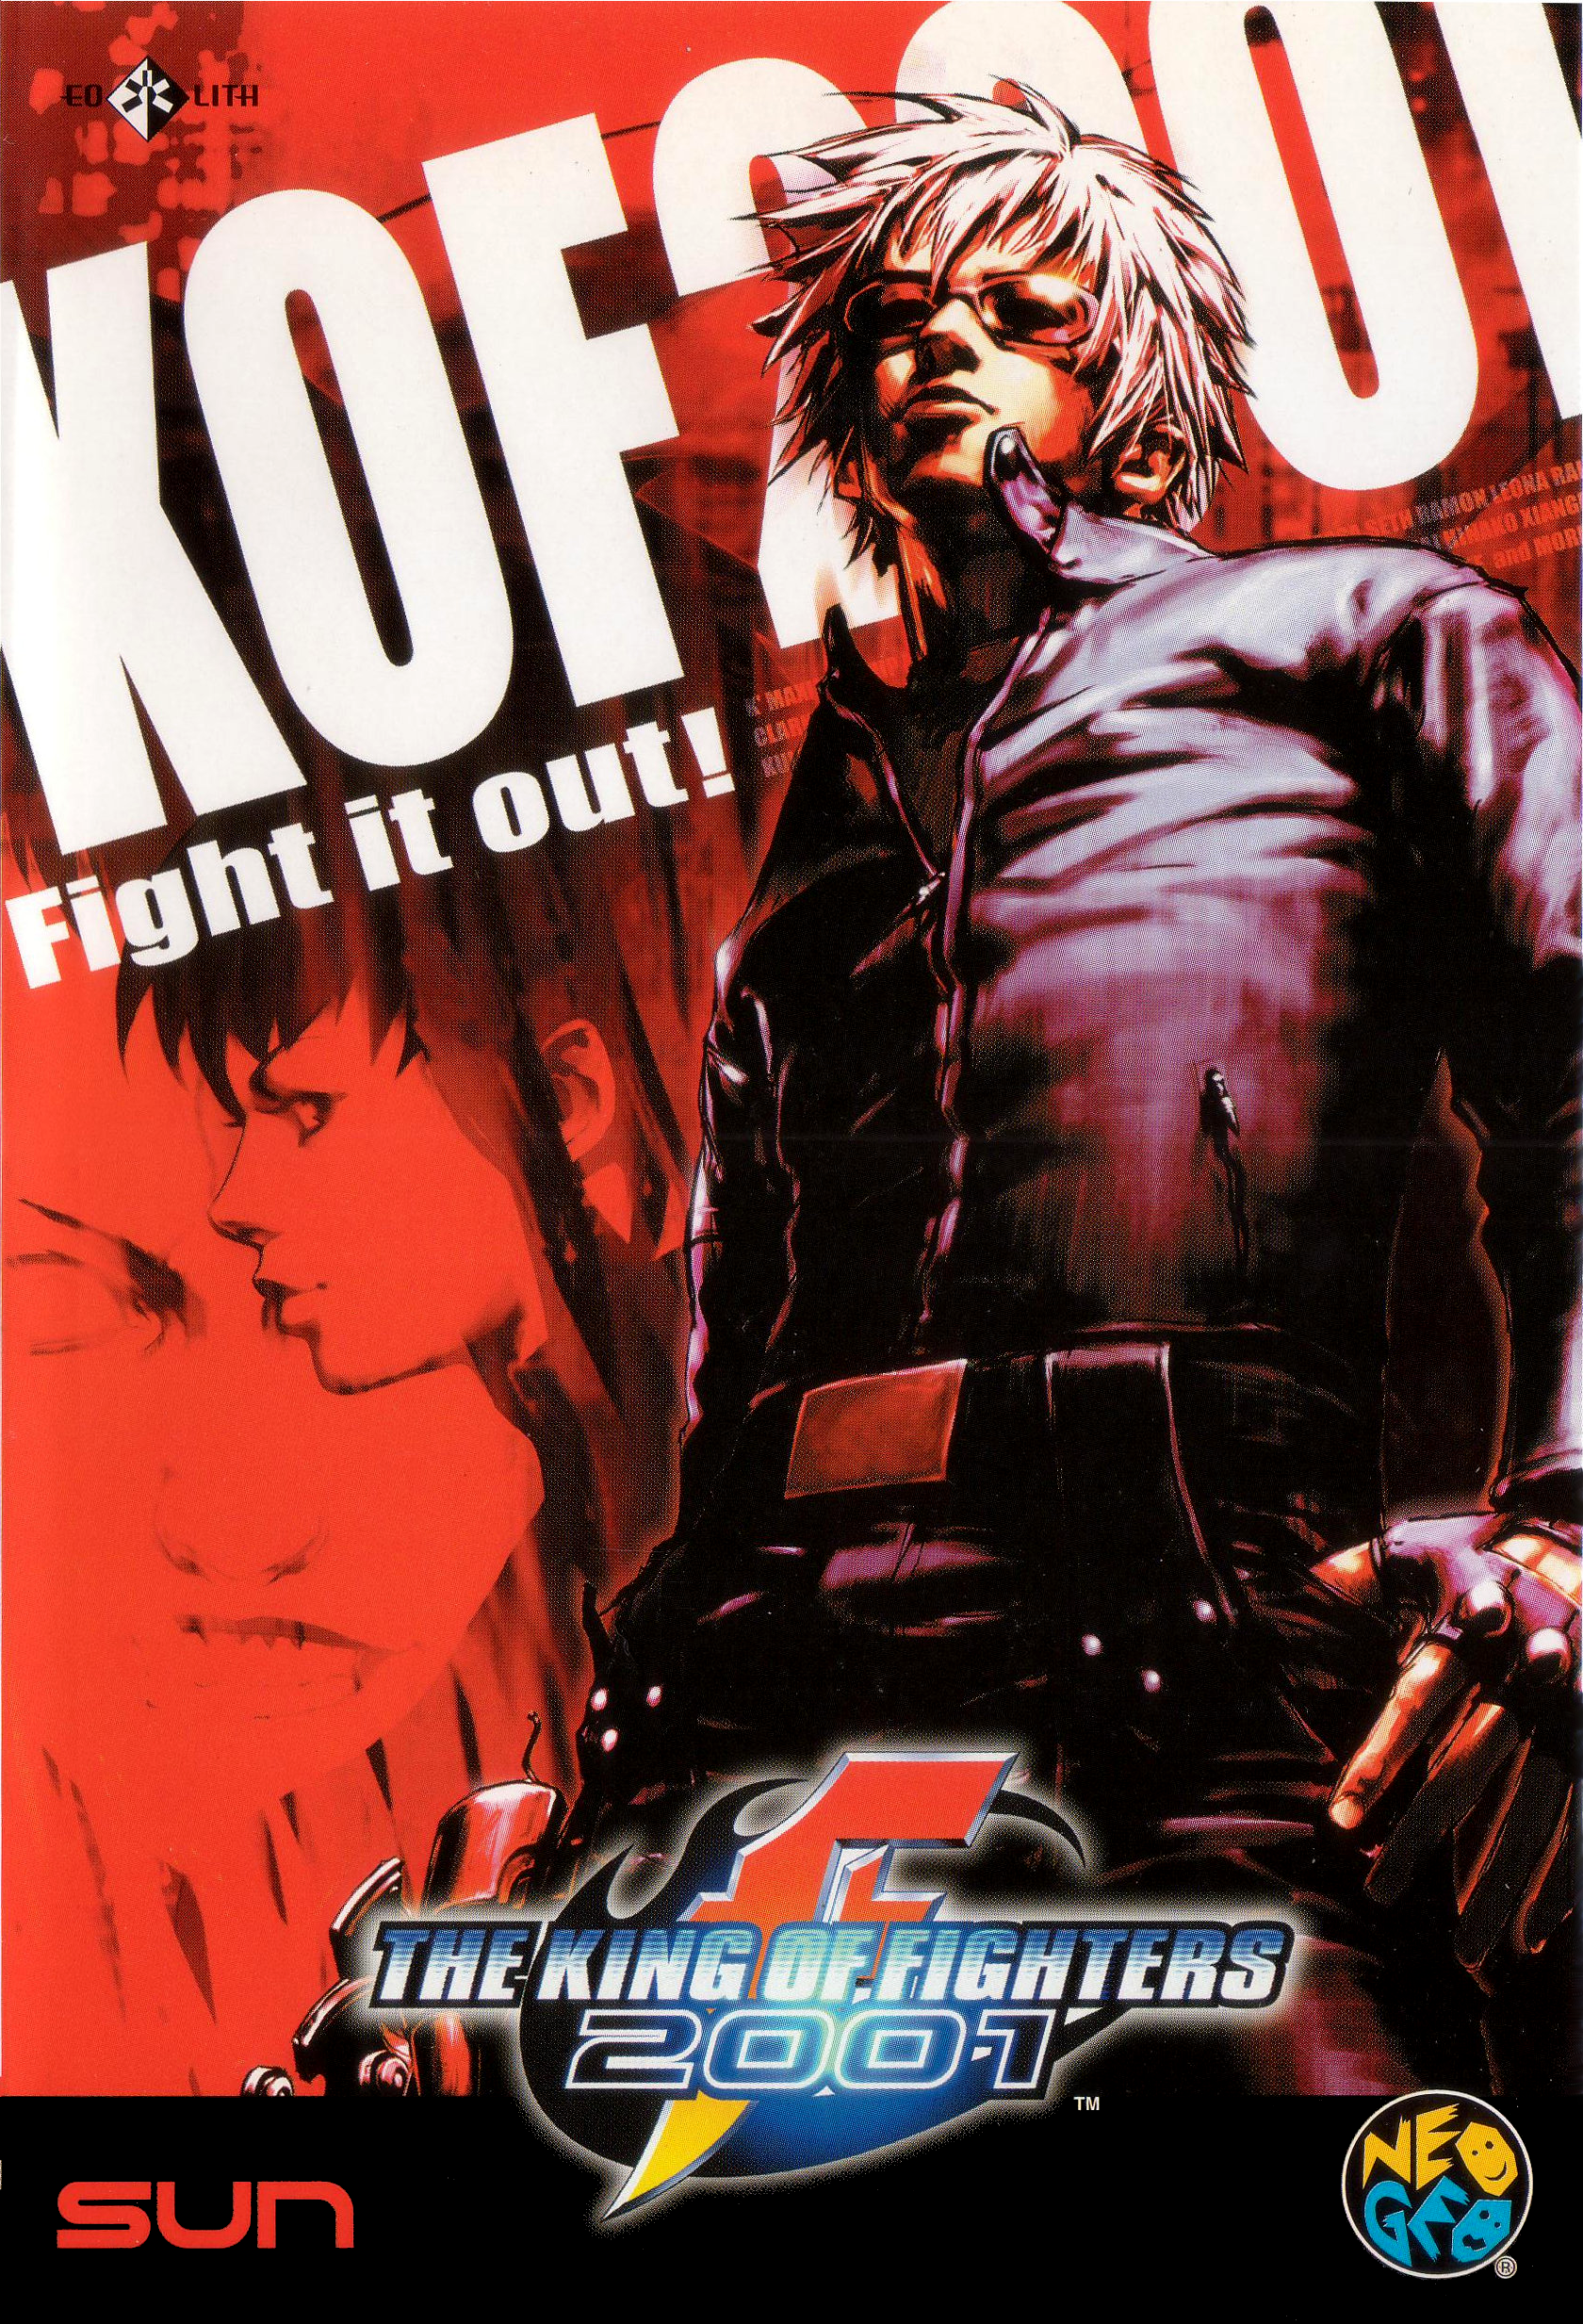 the king of fighter 97 download pc